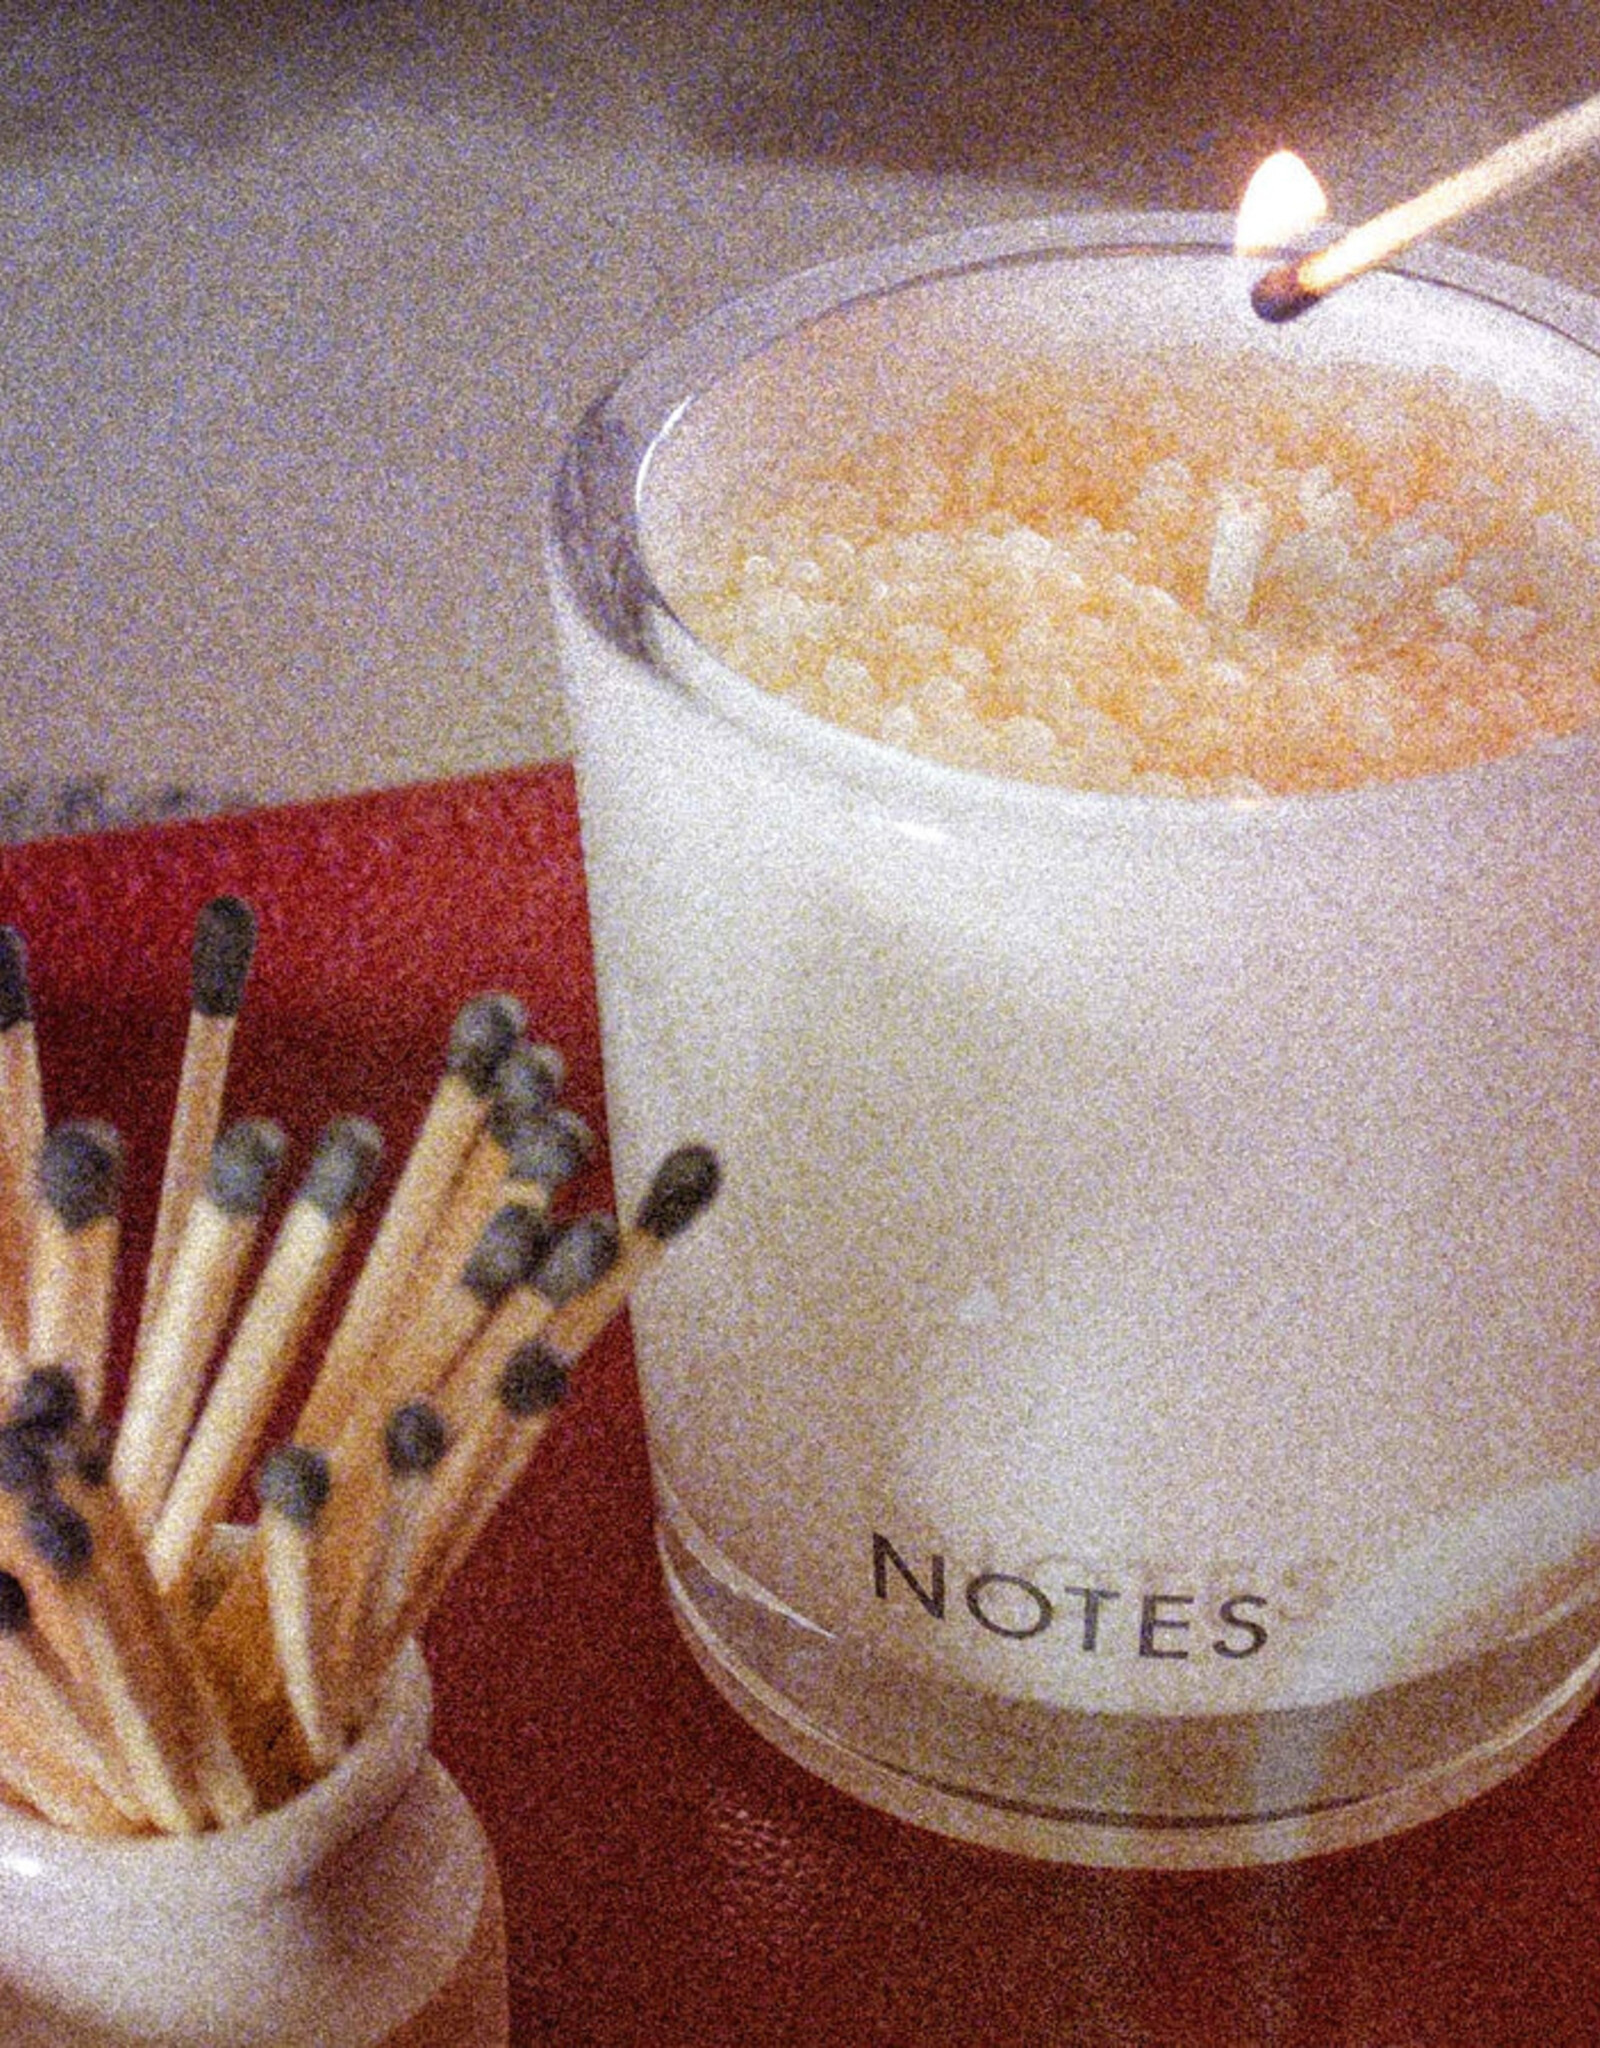 Notes Candle Refill Kits - Owen's Provisions & Apparel, Candle Refill Kit